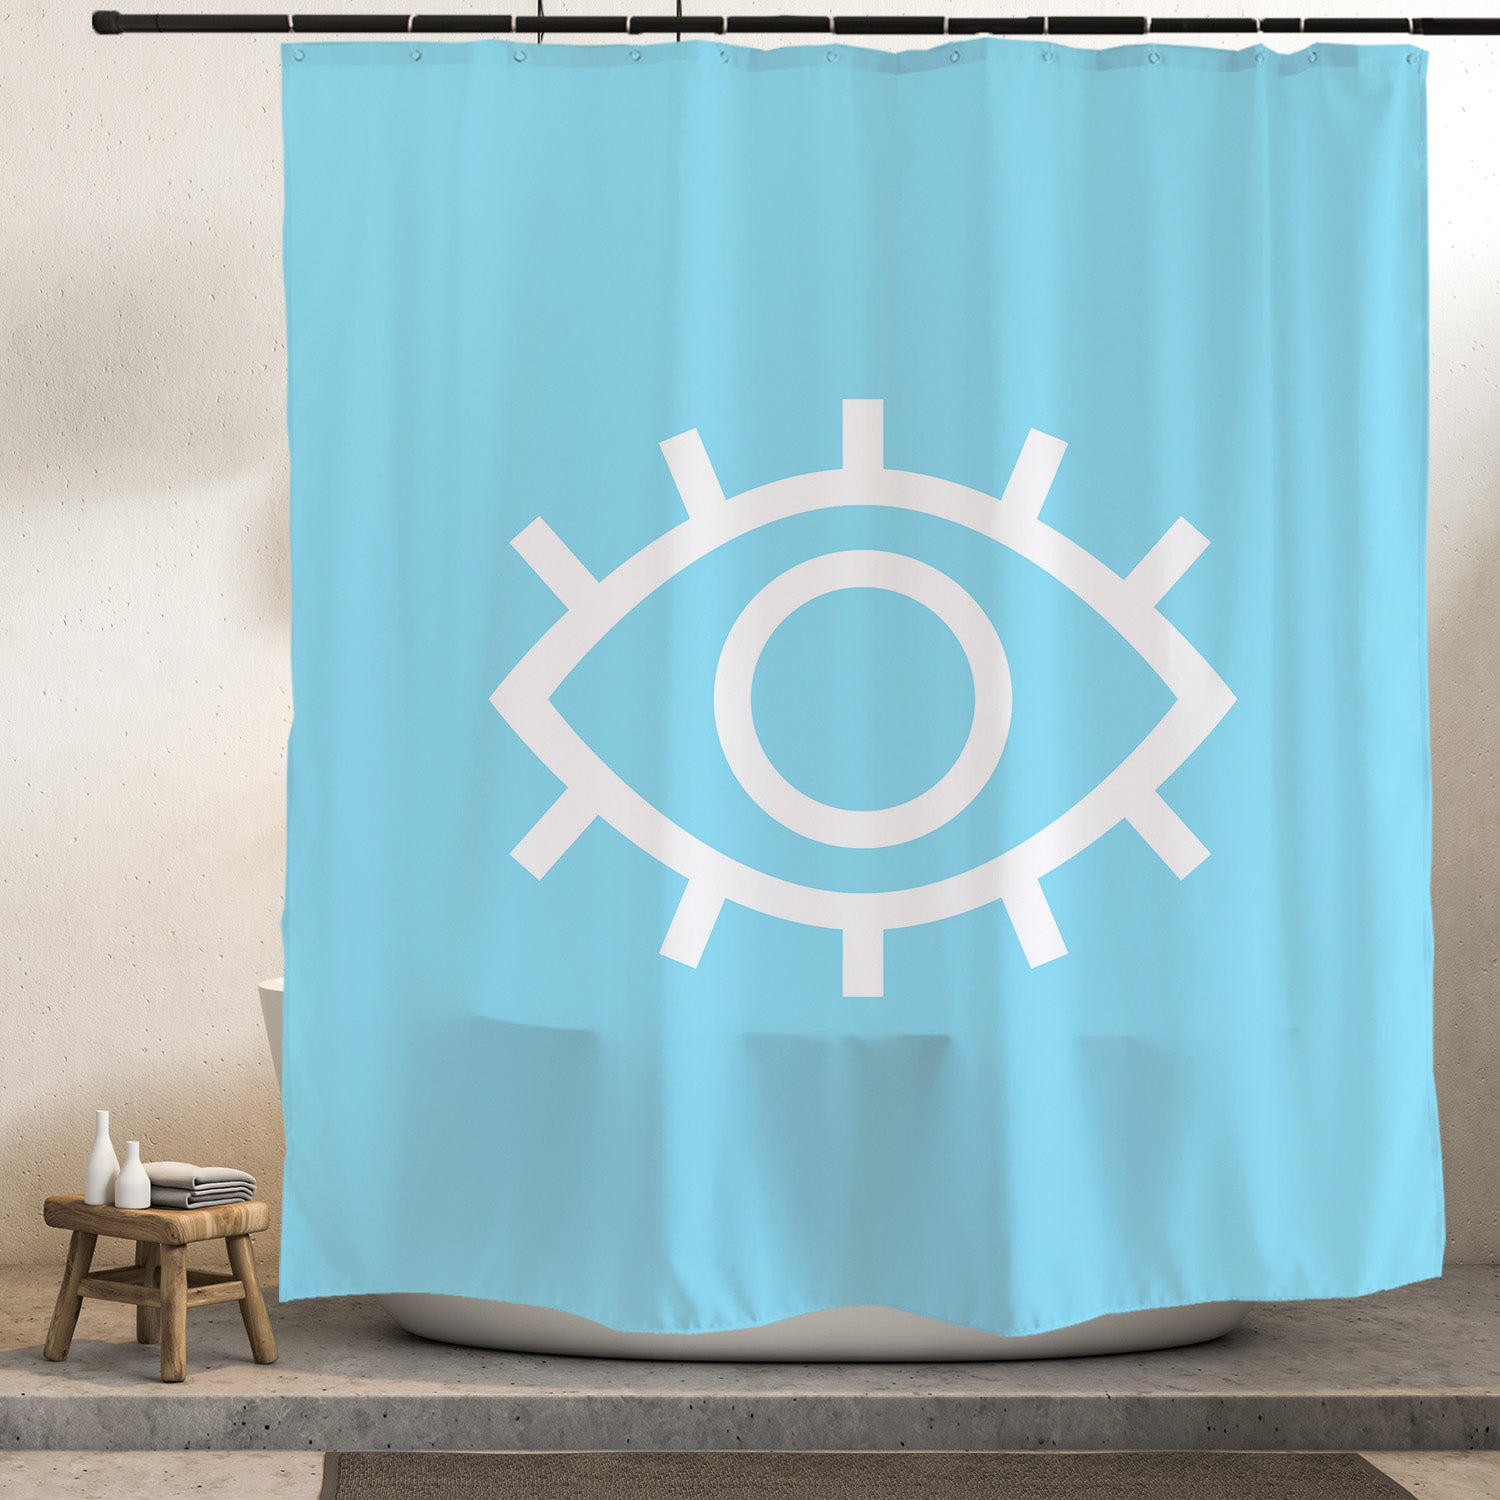 Feblilac the Eye of the Blue Devil Shower Curtain with Hooks